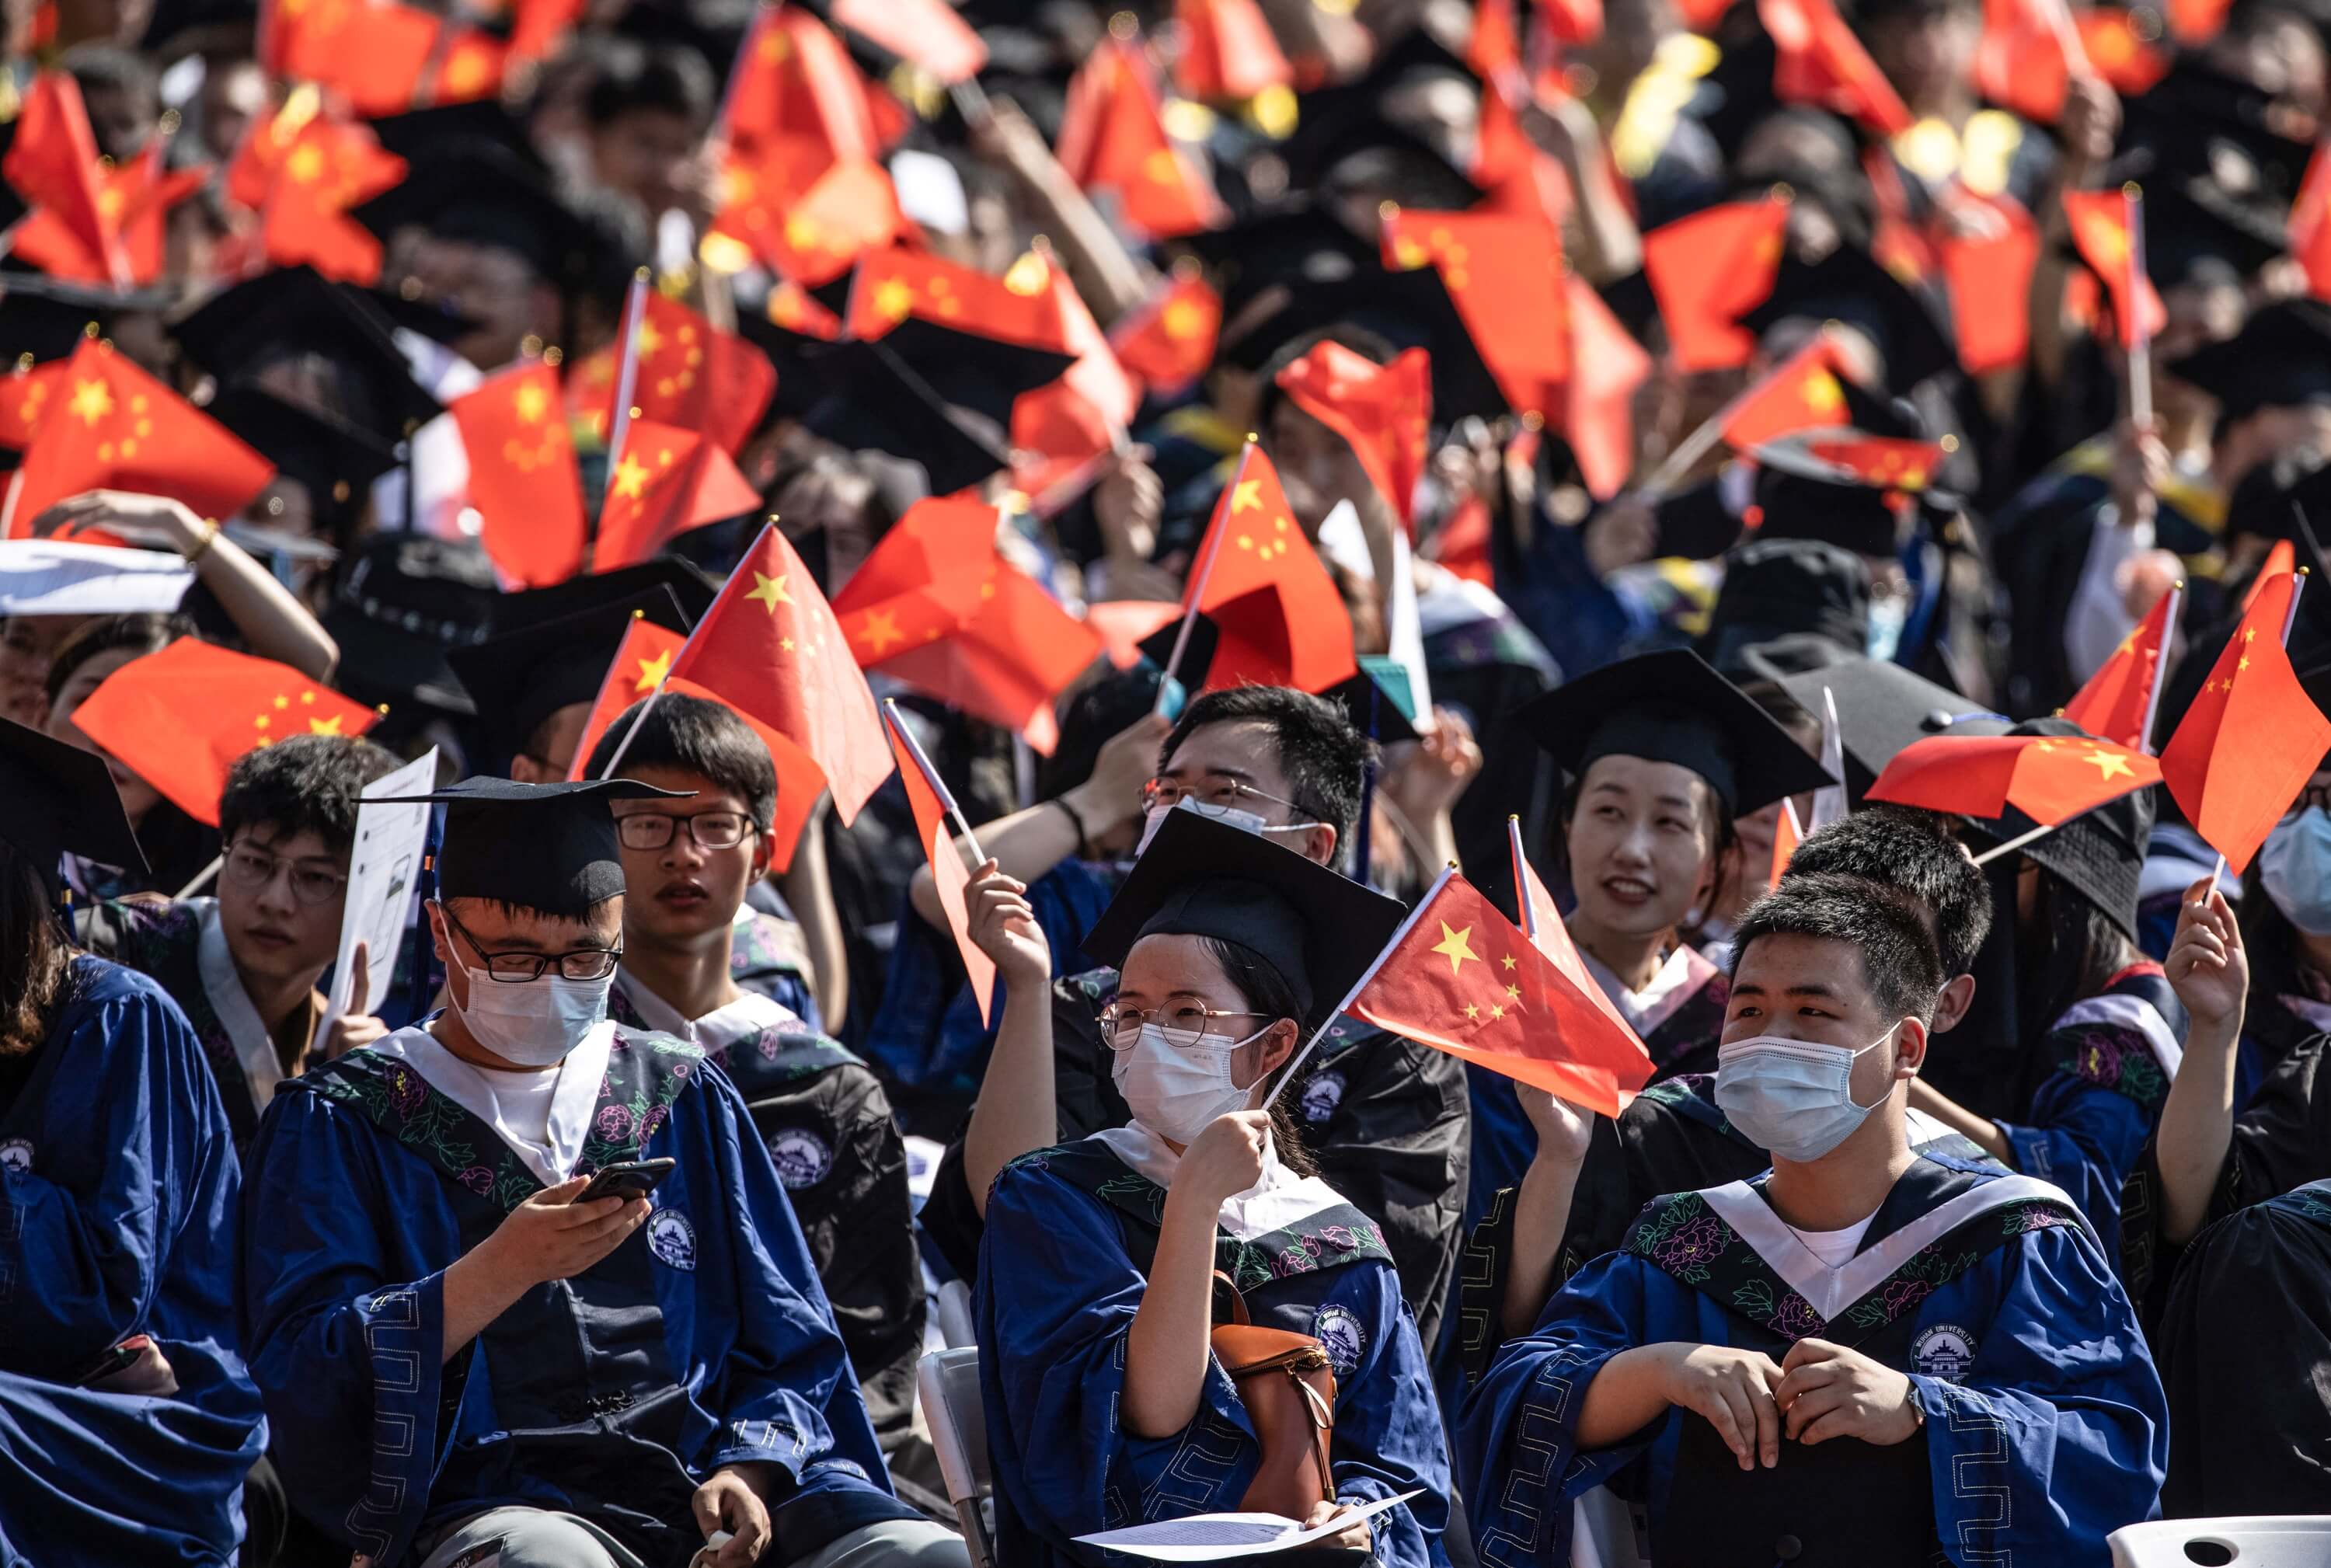 Return to China 2022: Will China’s border policies hold for international education?